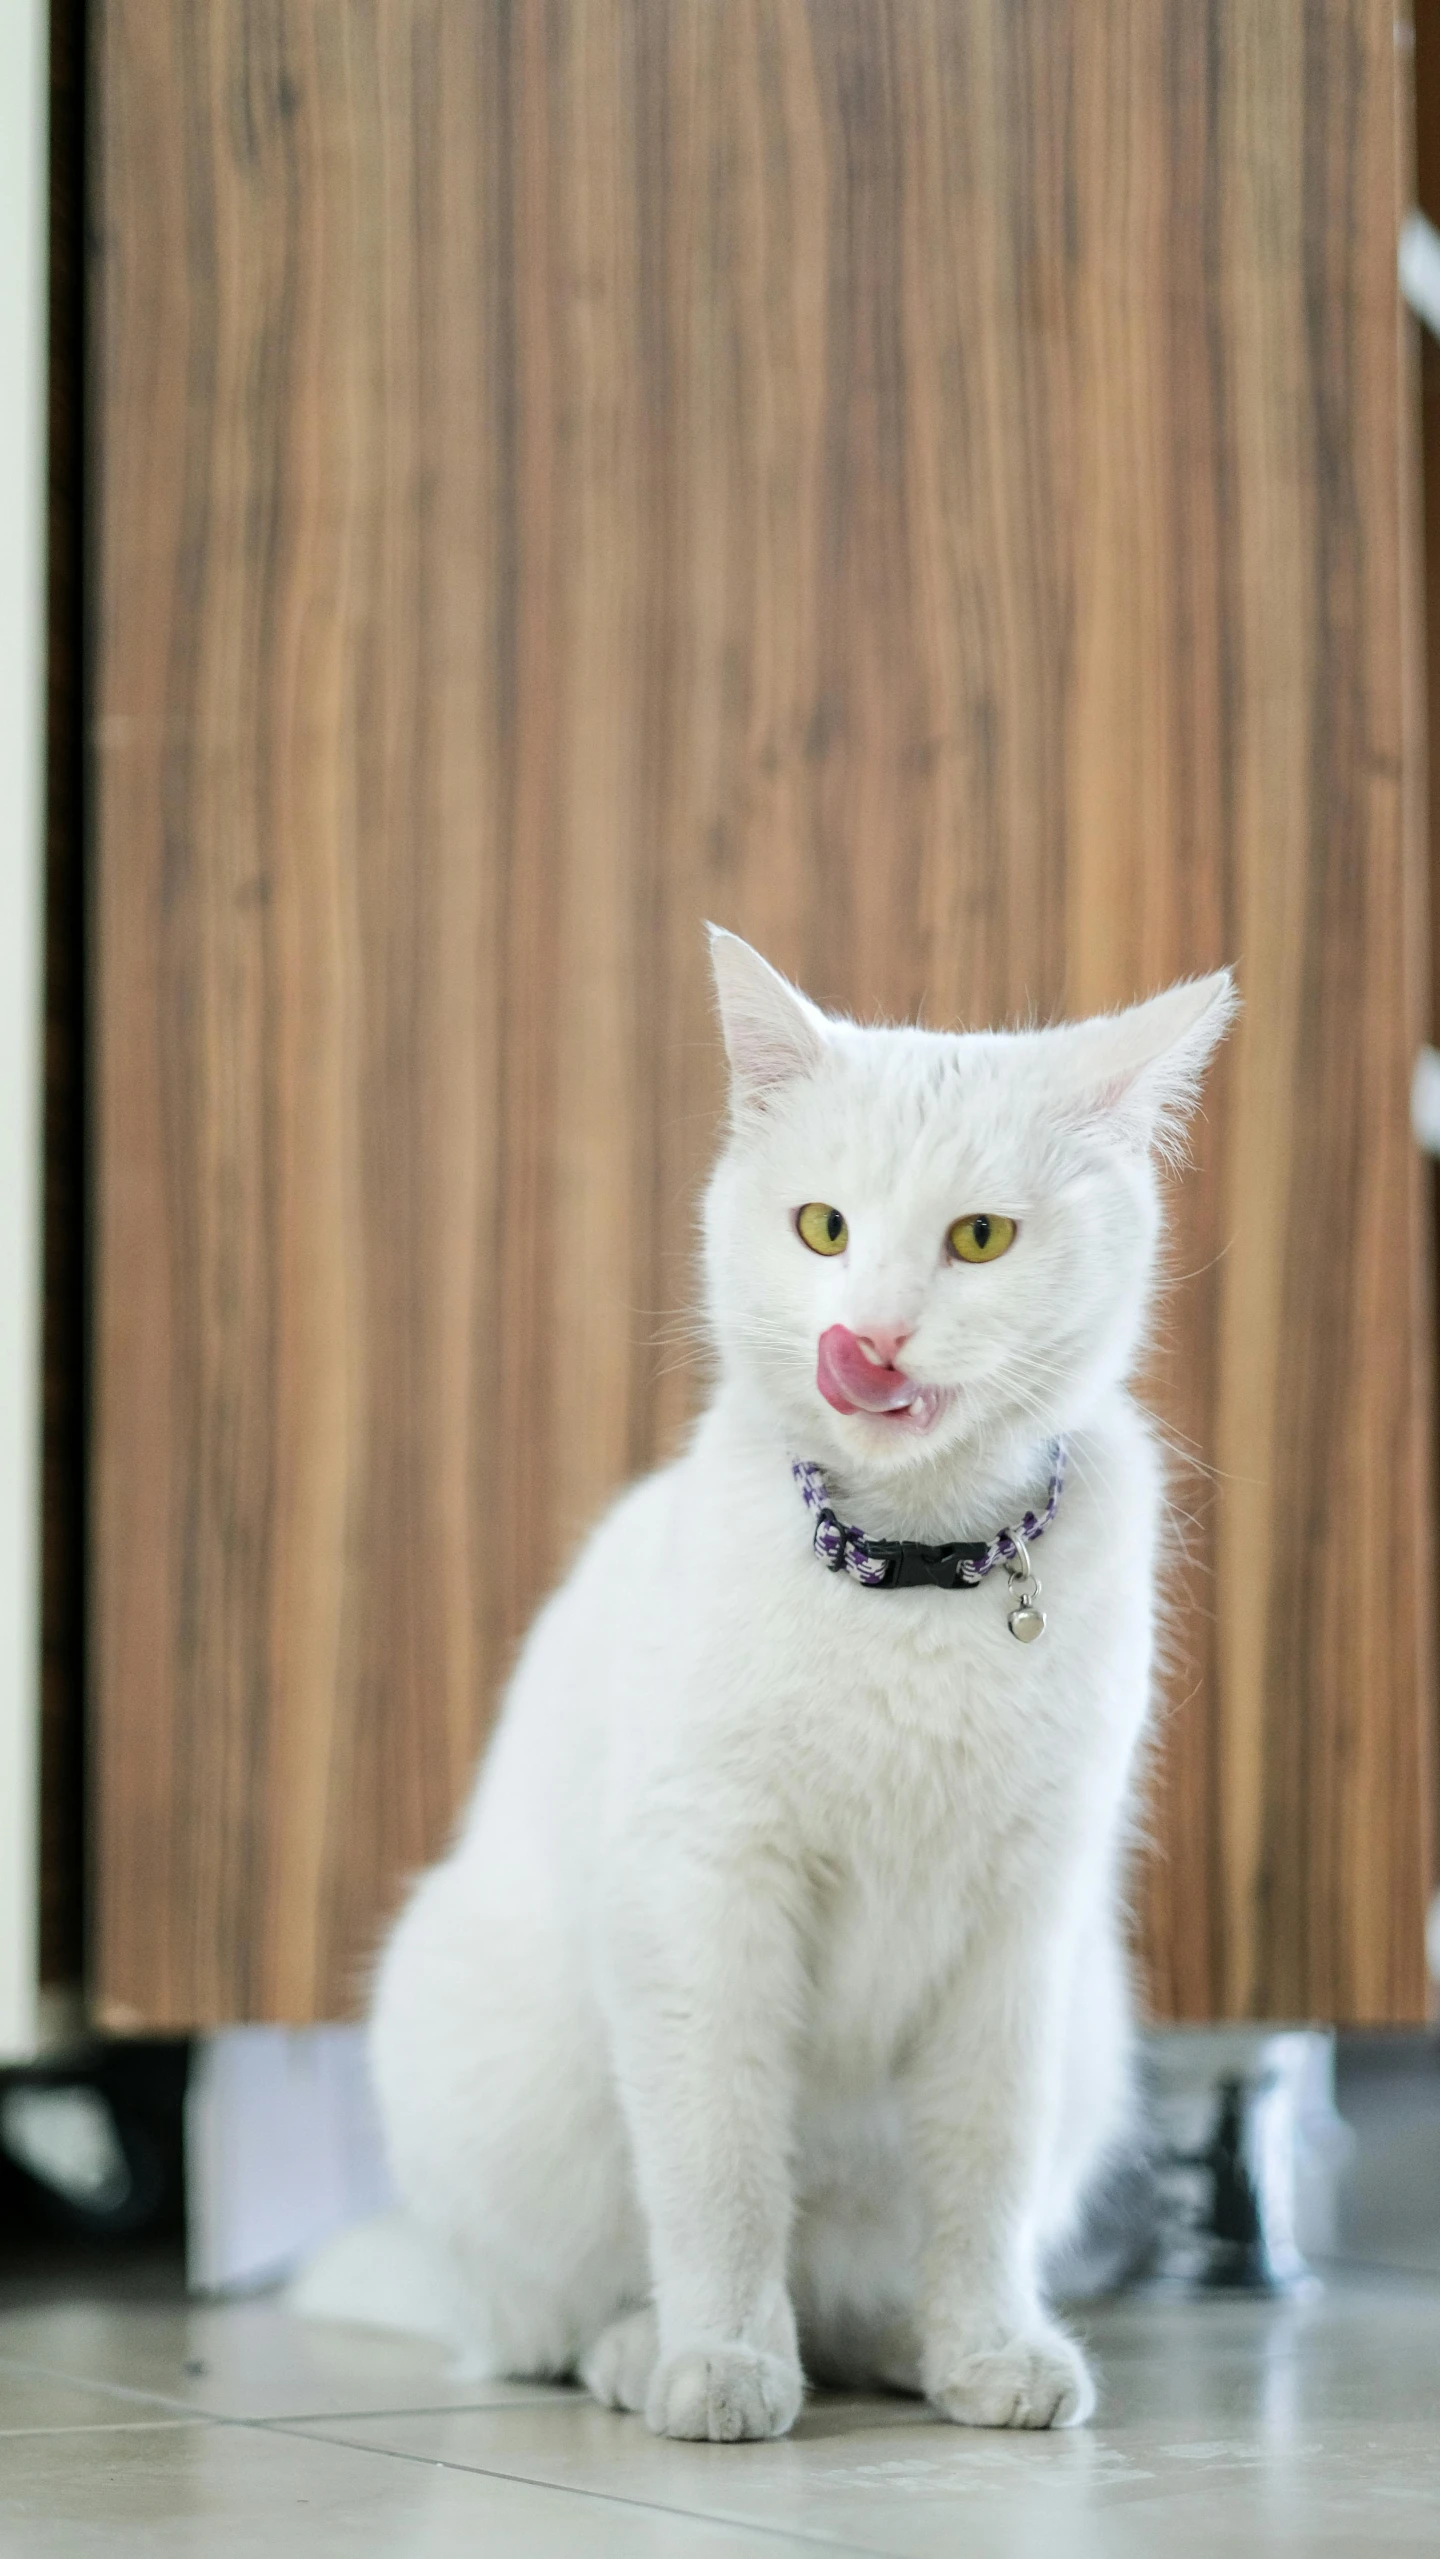 a white cat wearing a bow tie sitting